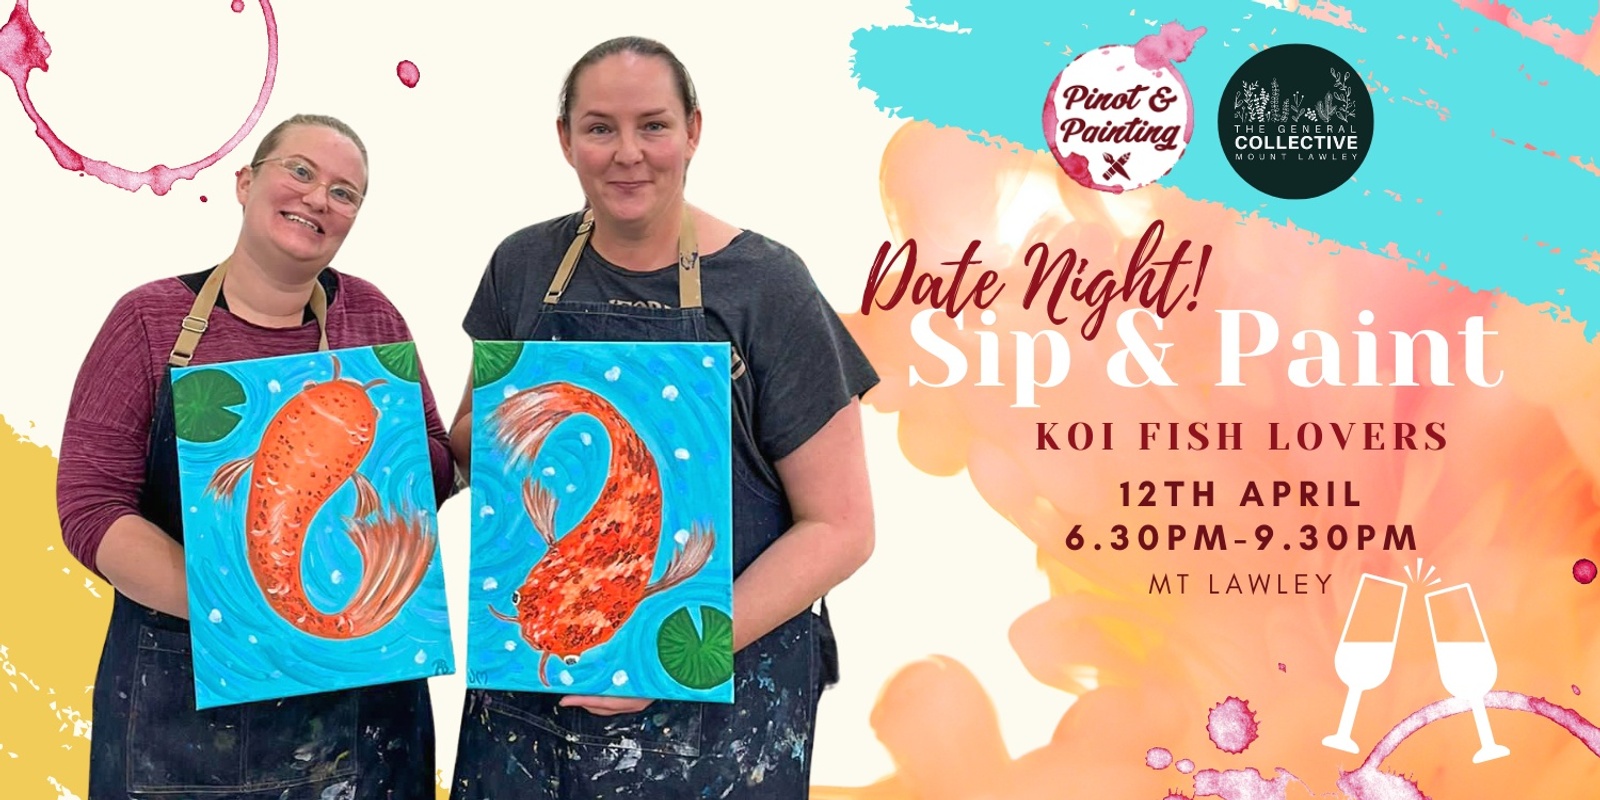 Banner image for Koi Fish Lovers  - Date Night Sip & Paint @ The General Collective